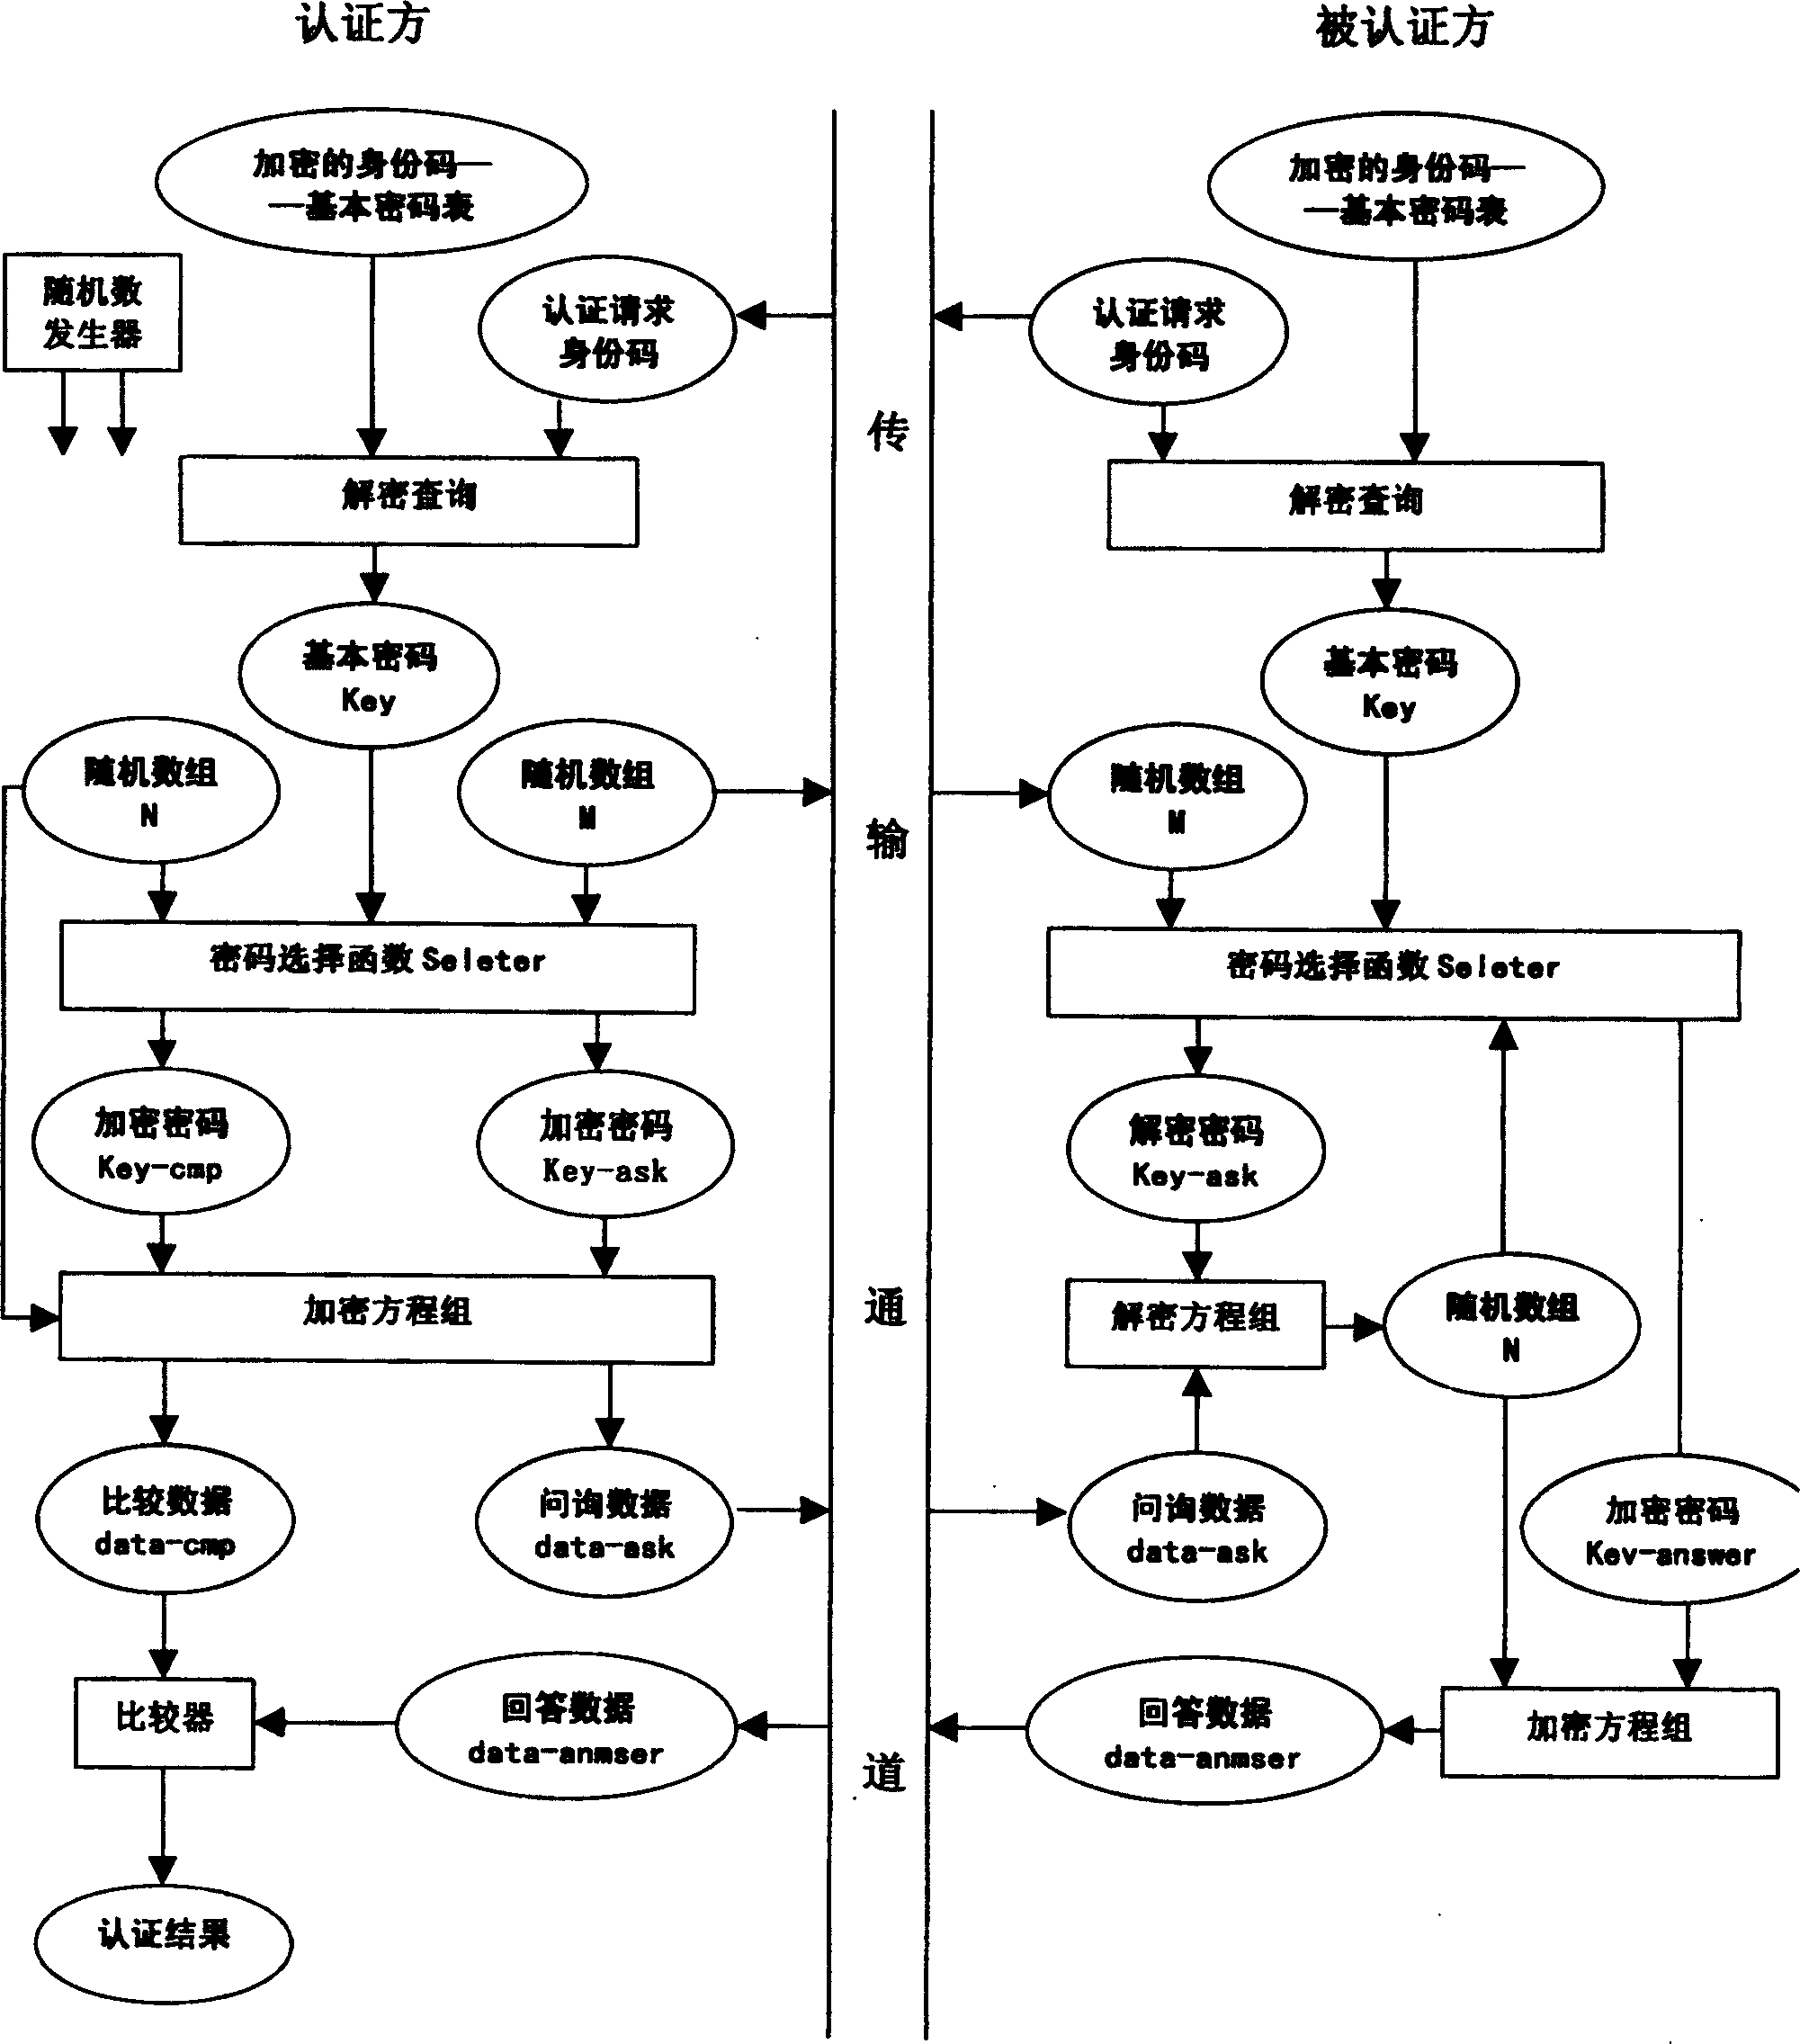 Method of digit identity authentication based on features of non-biophysics